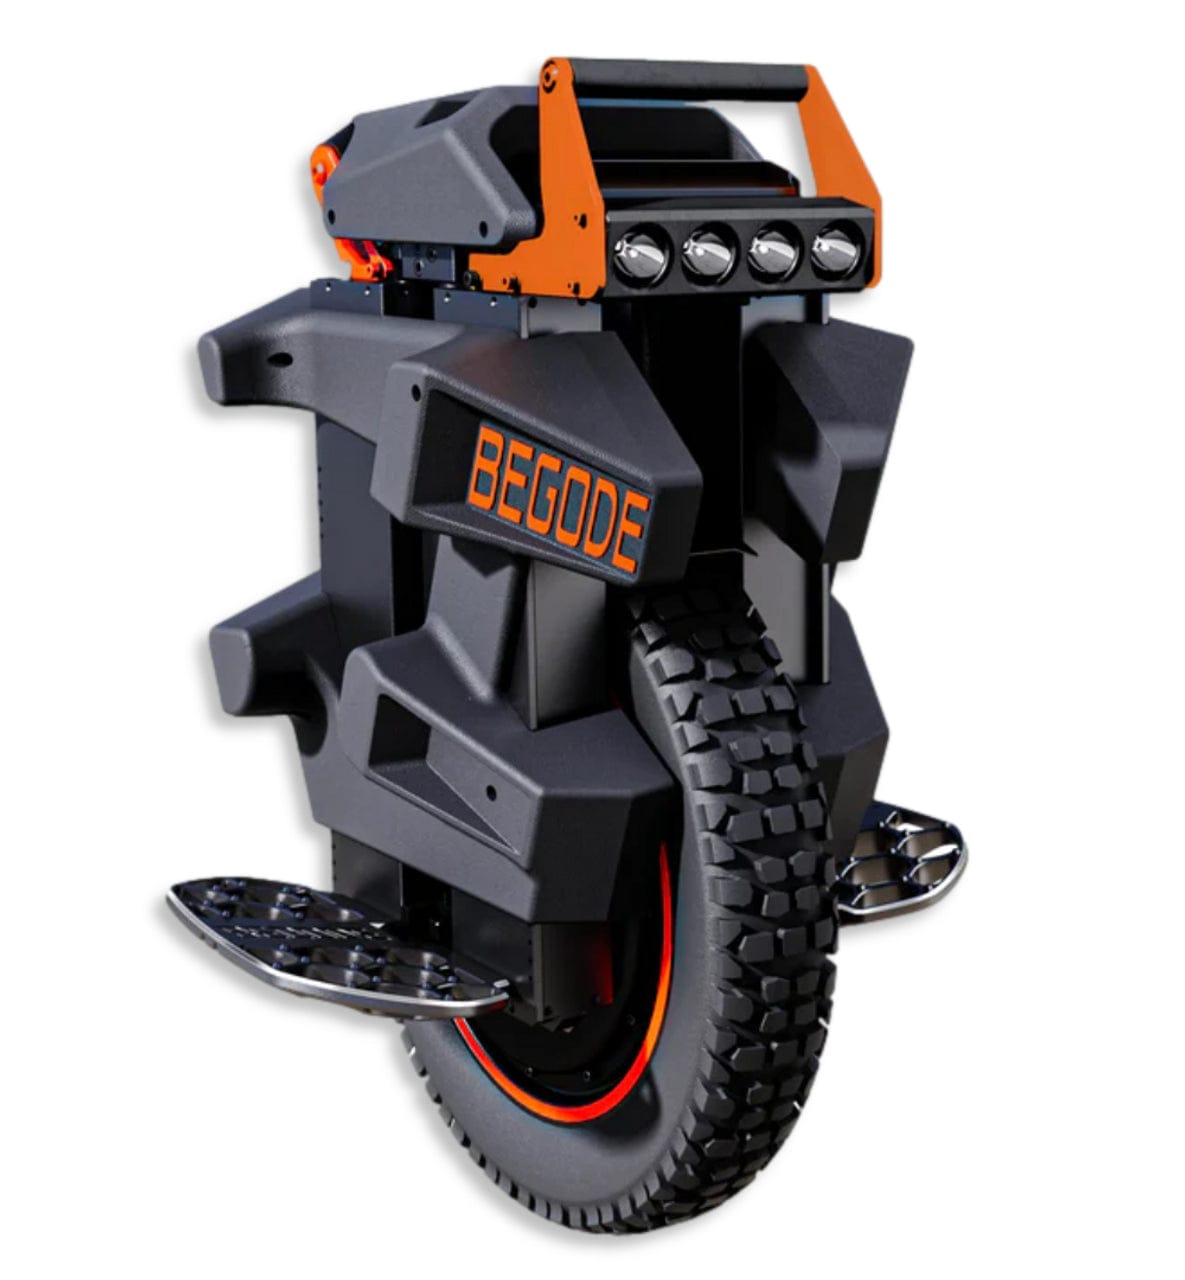 Ride One Begode Extreme - Electric Lounge member's only discount